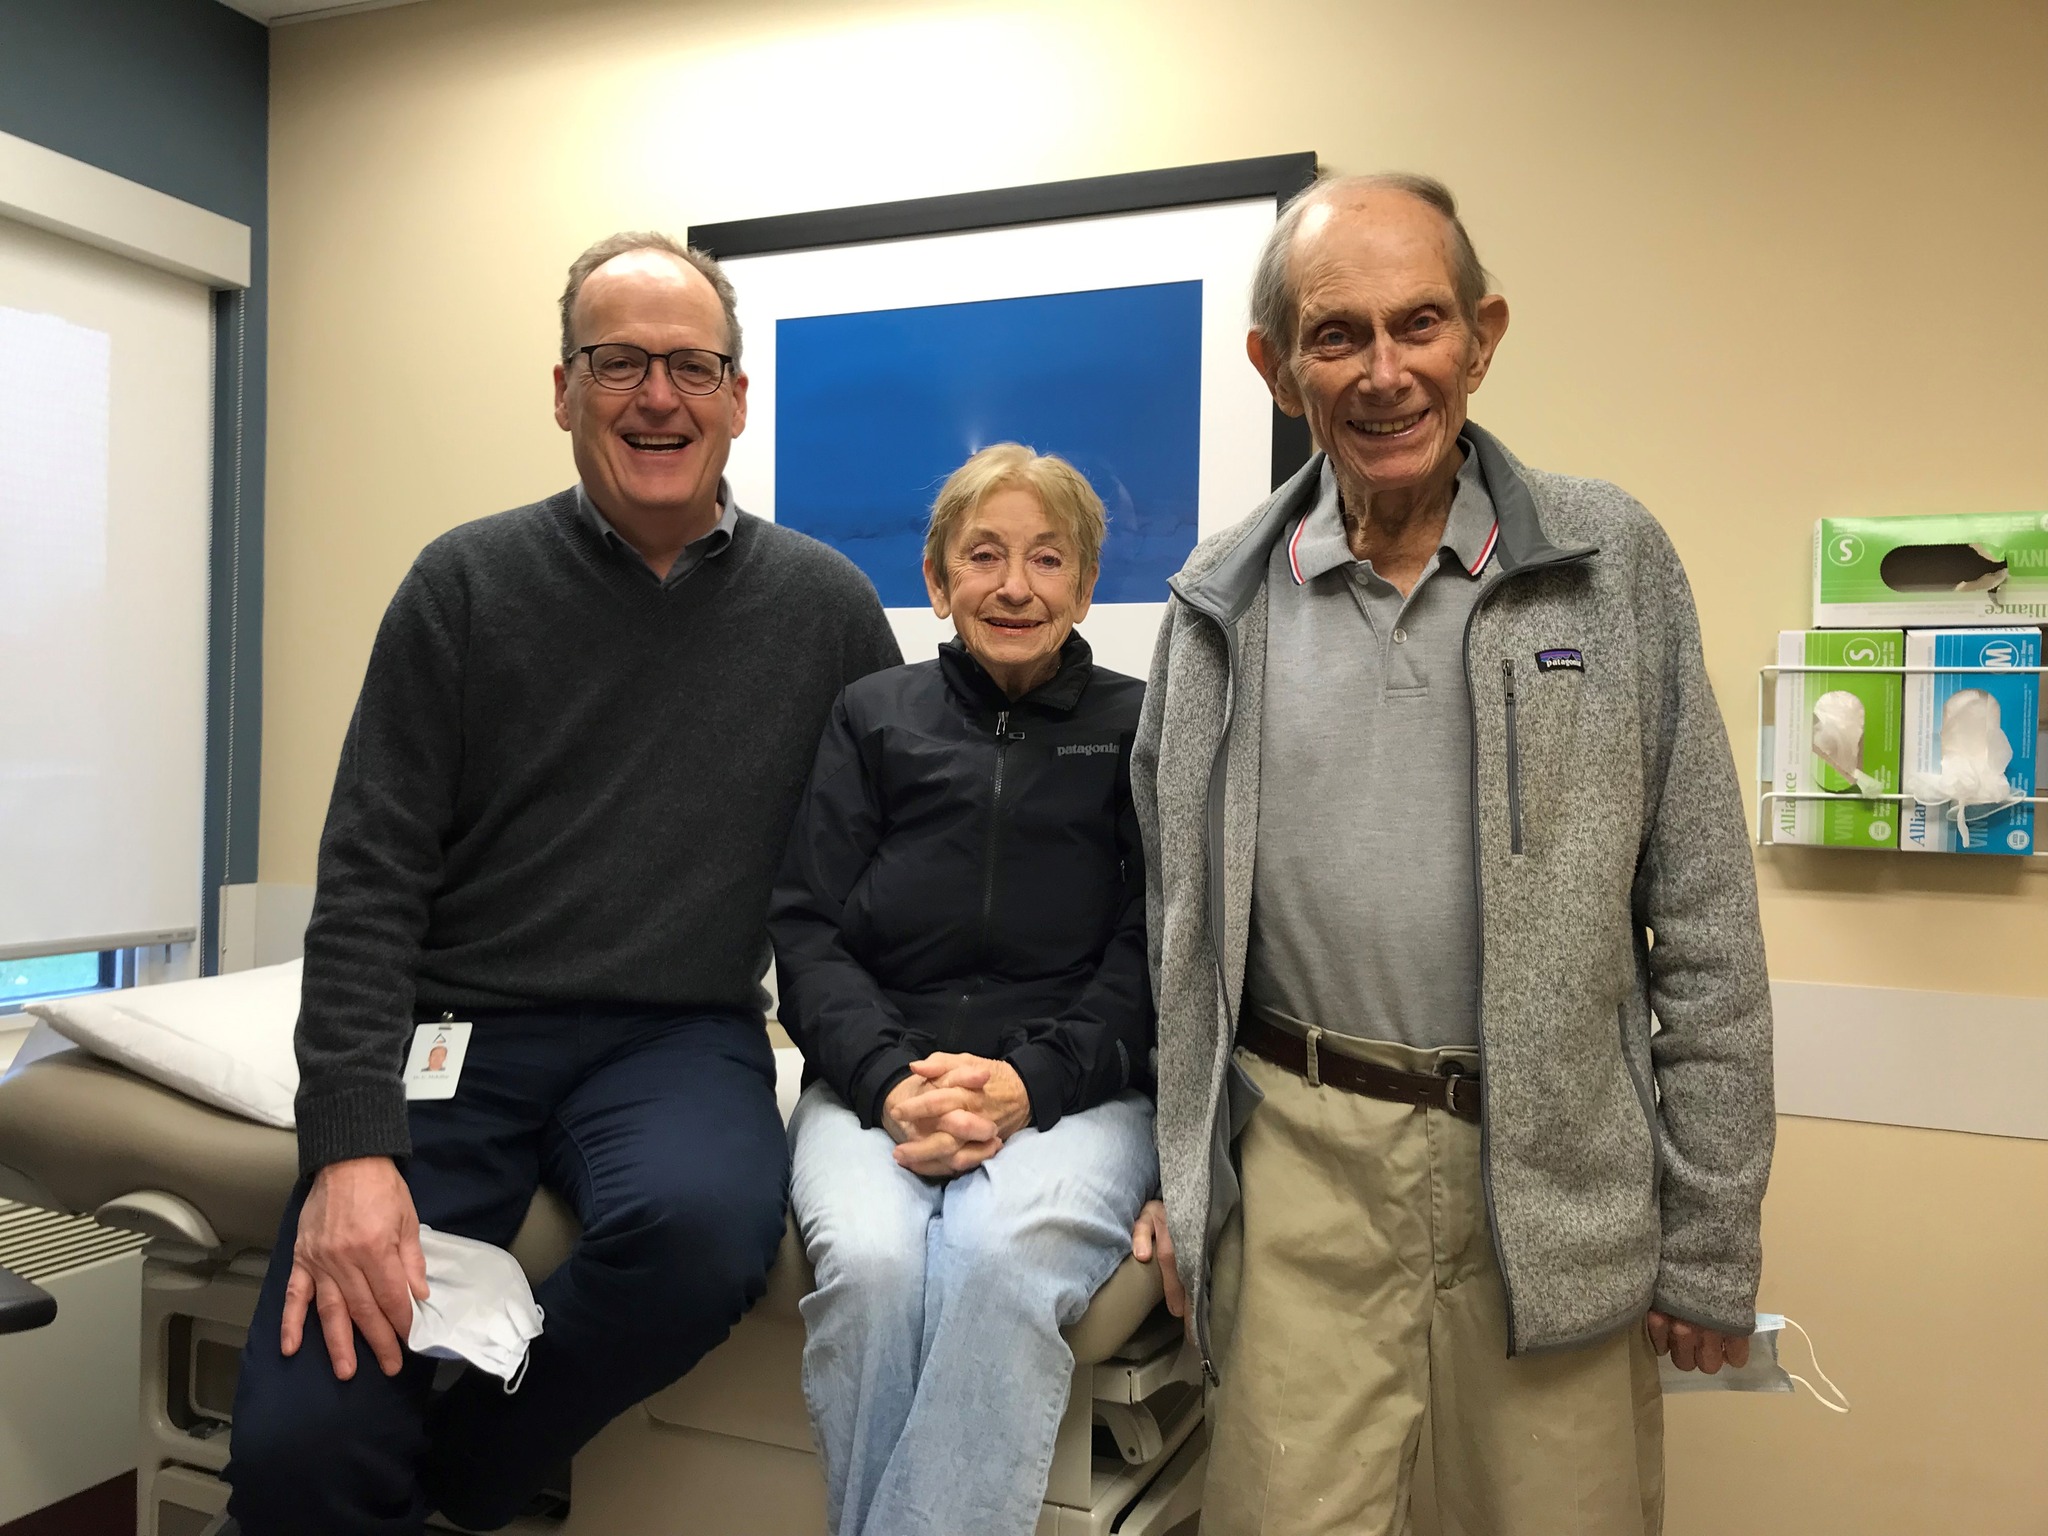 Three people smile for a photo in a doctor's exam room. Far left is a man with glasses and a grey sweater, in the middle is a woman with short blonde hair and on the right is a balding older man with a grey shirt.